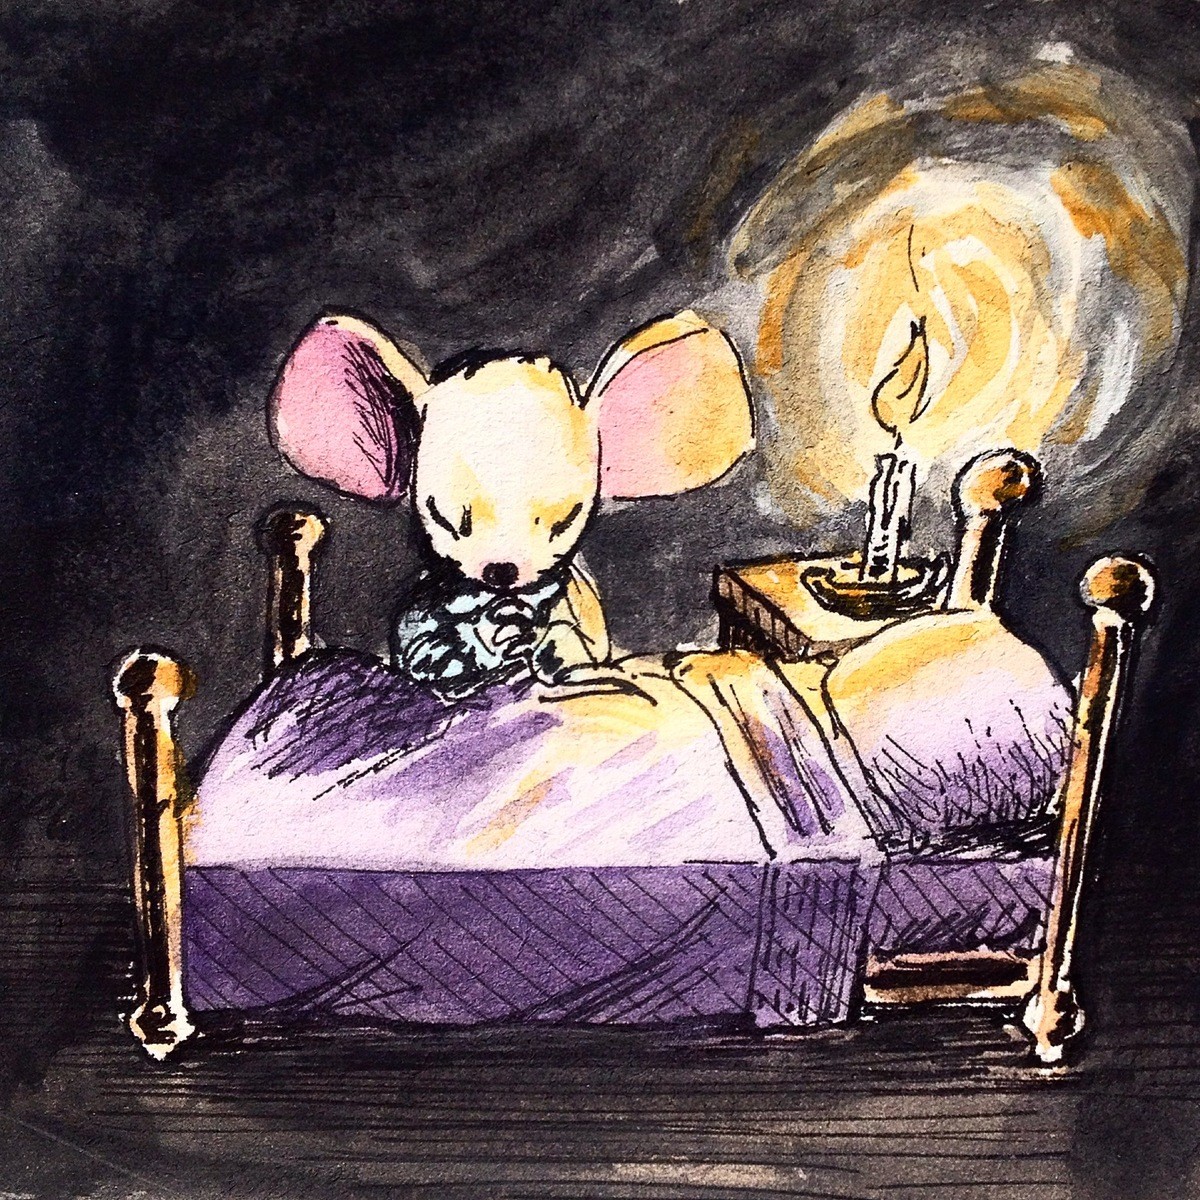 White Mouse Praying. Watercolor and gauche? join list: WatercolorAndOrInk (43 subs)Mention History Or just ink? Want to Commission me? DM me! For more like this